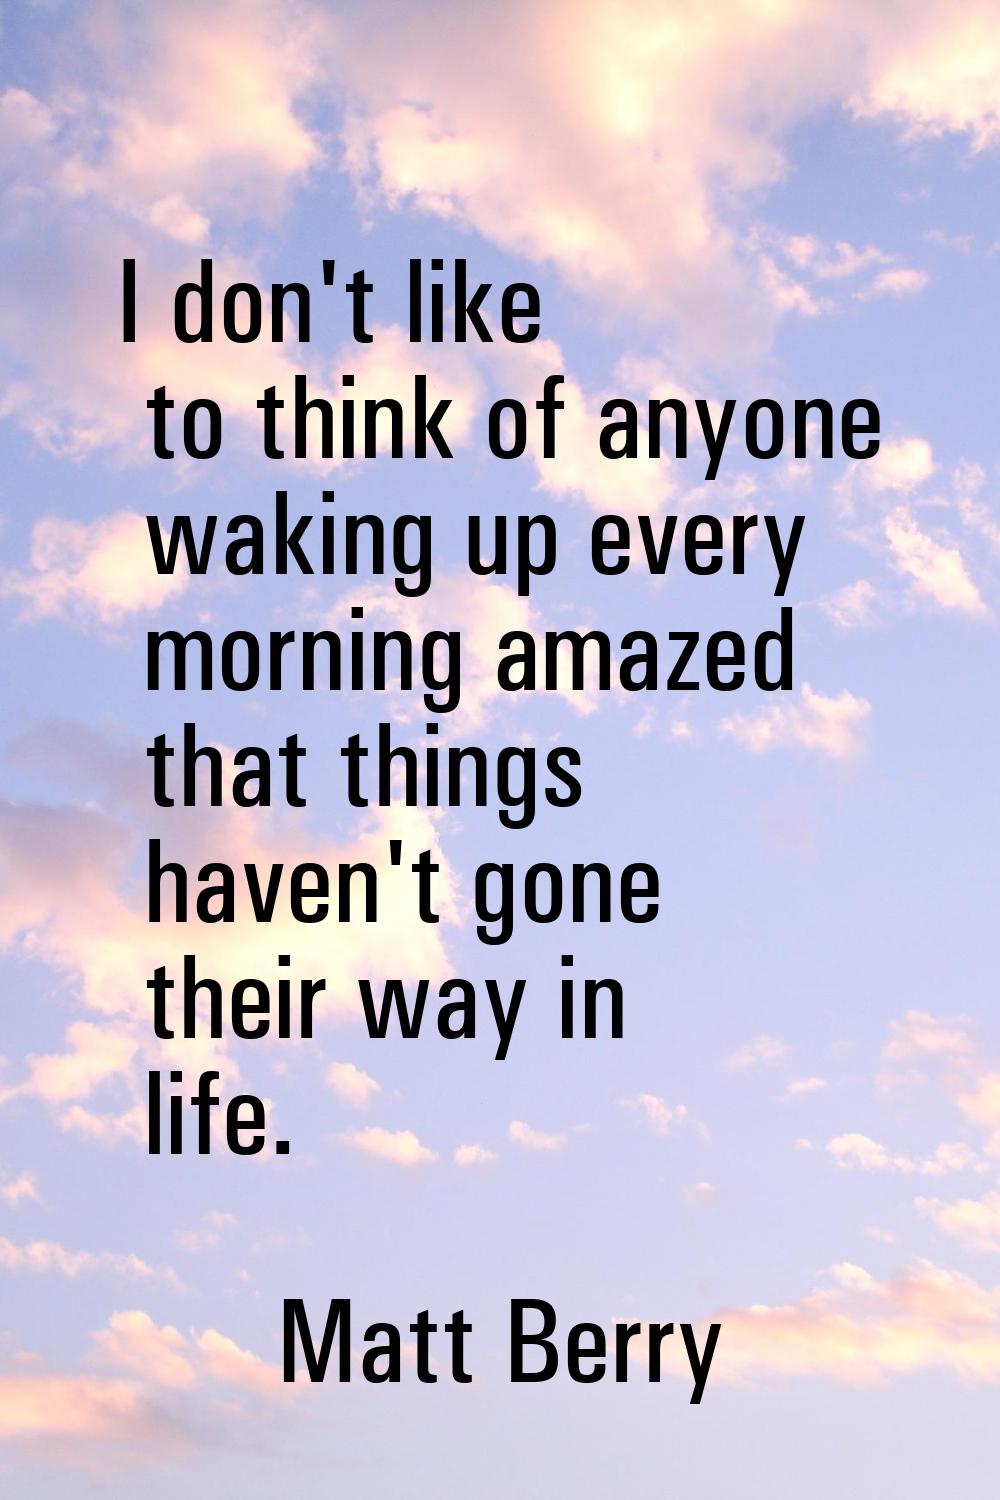 I don't like to think of anyone waking up every morning amazed that things haven't gone their way i